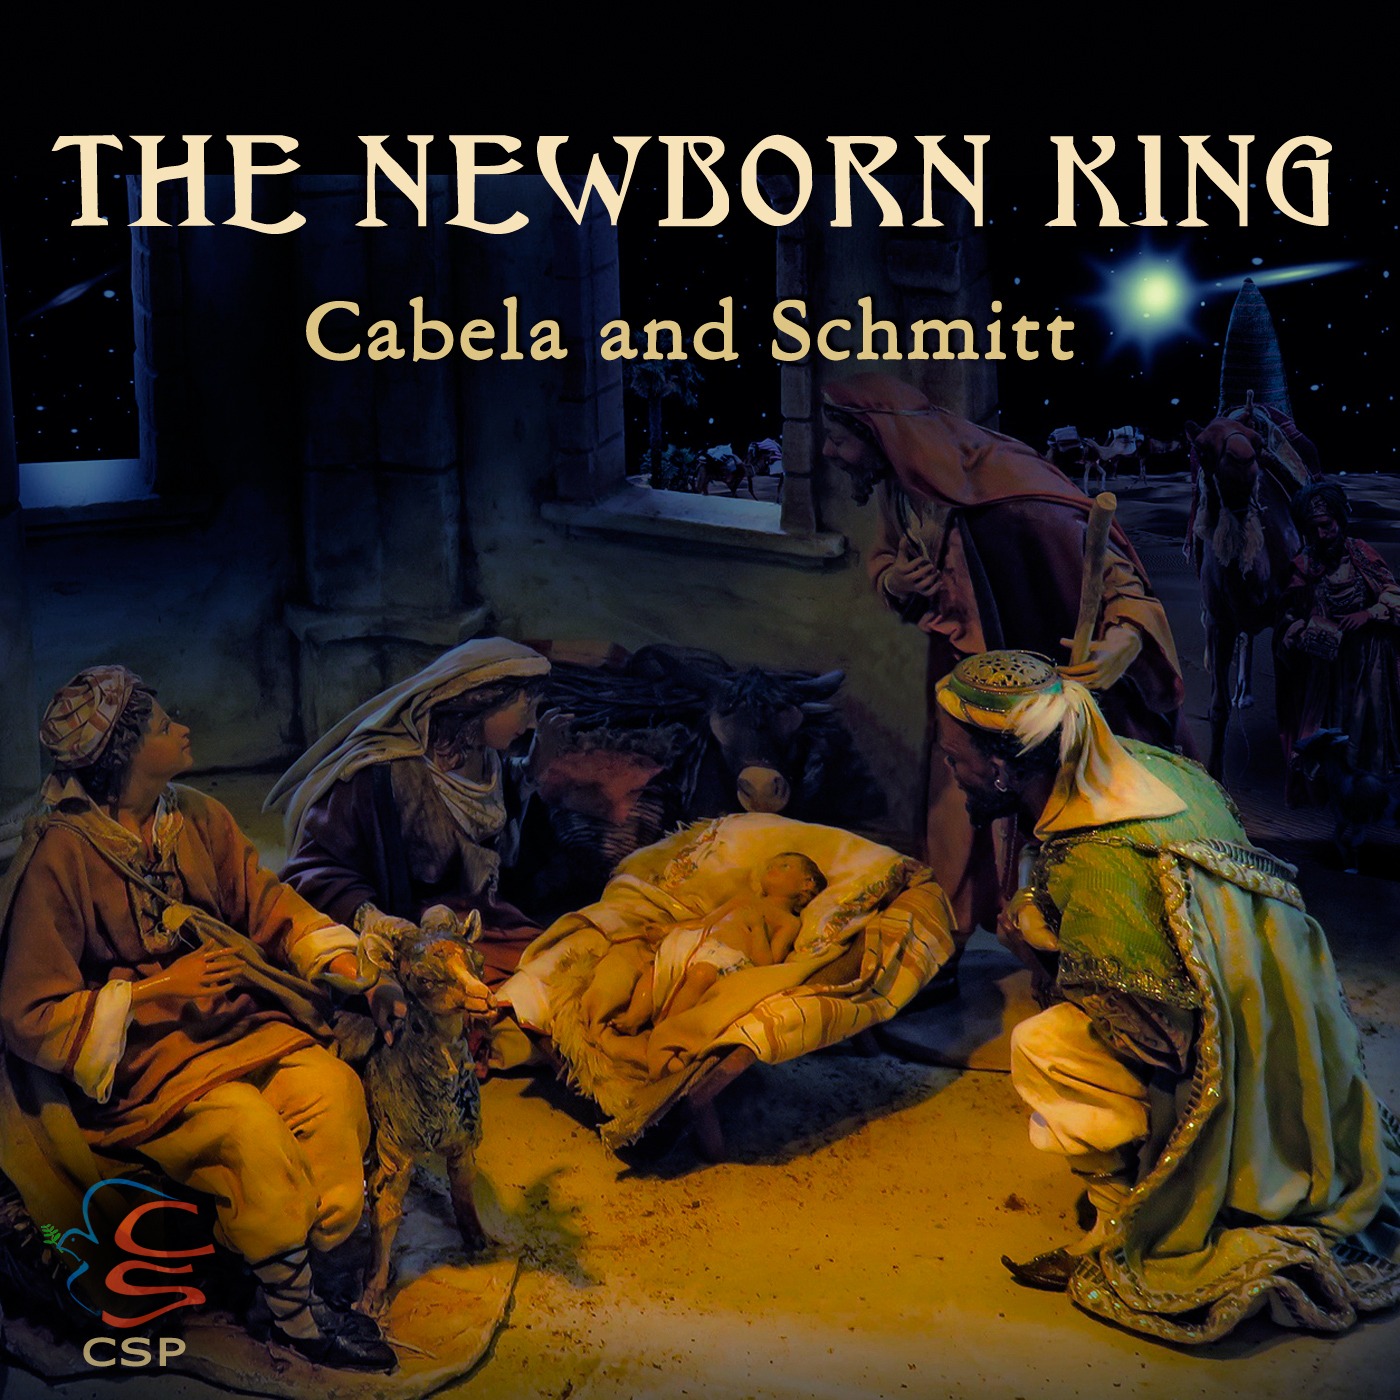 Bringing the Christmas Spirit Alive with a Soul-Captivating New Record- Cabela and Schmitt Music Release New Album